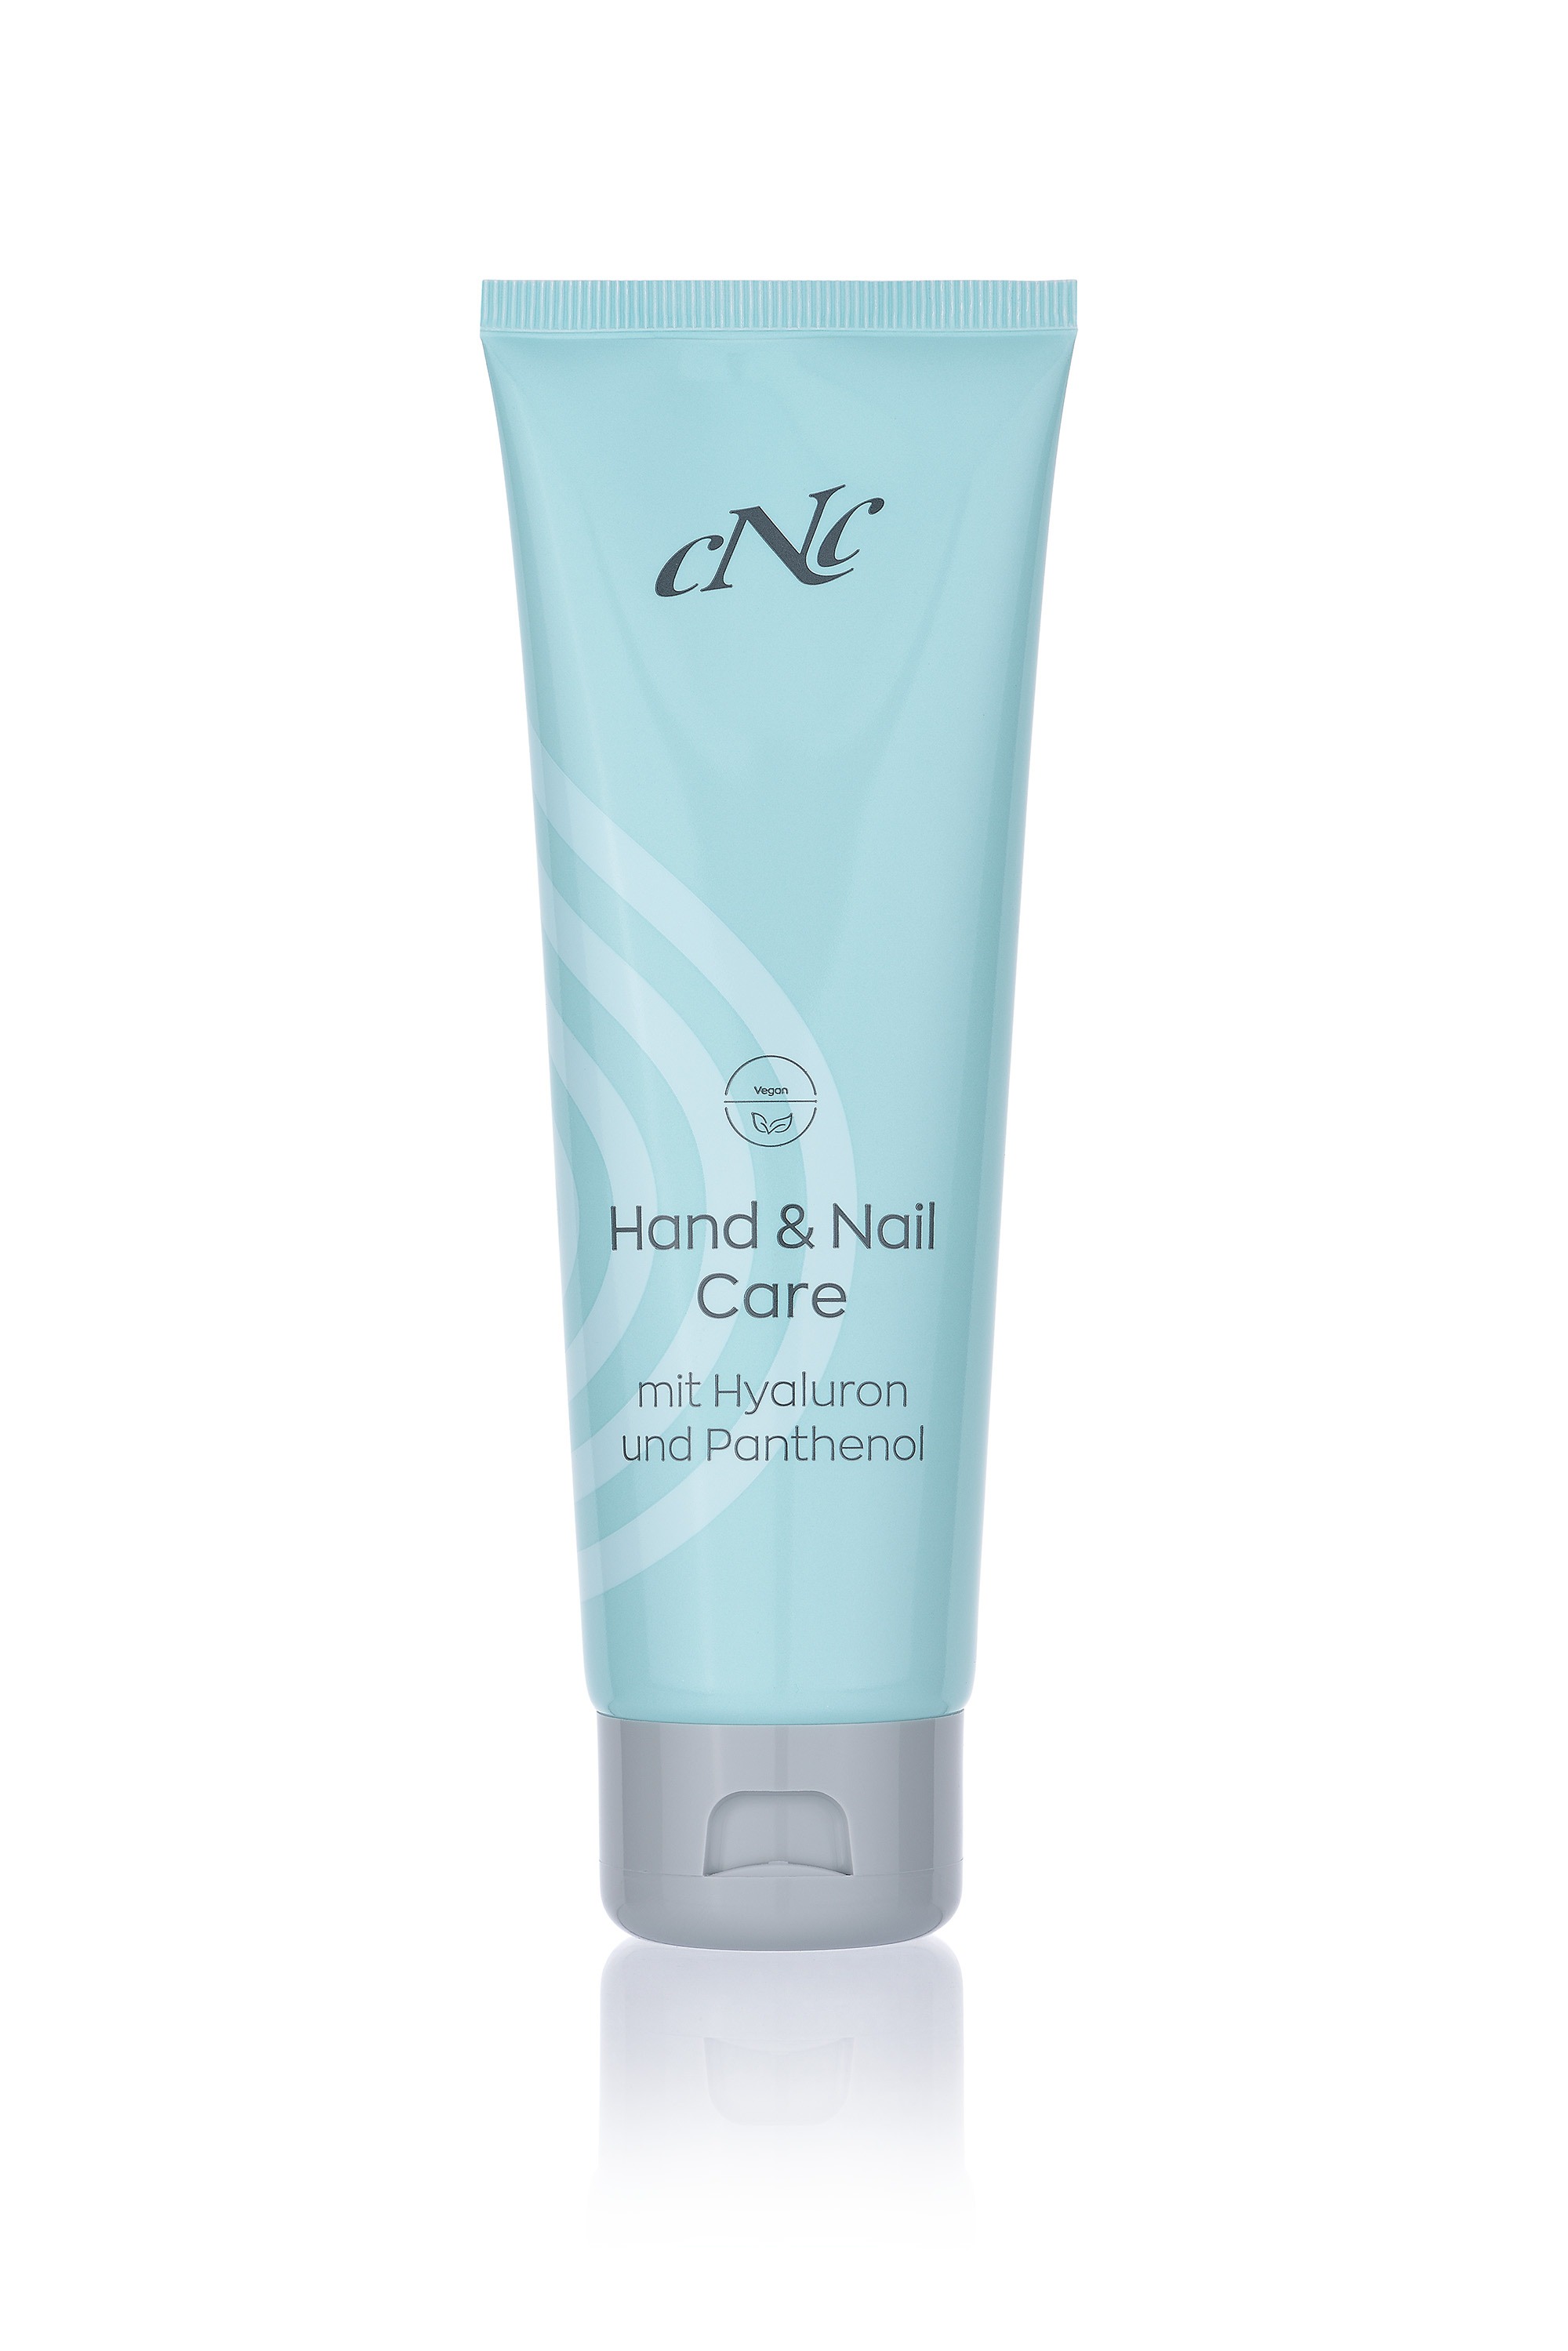 CNC Hand & Nail Care mit Hyaluron